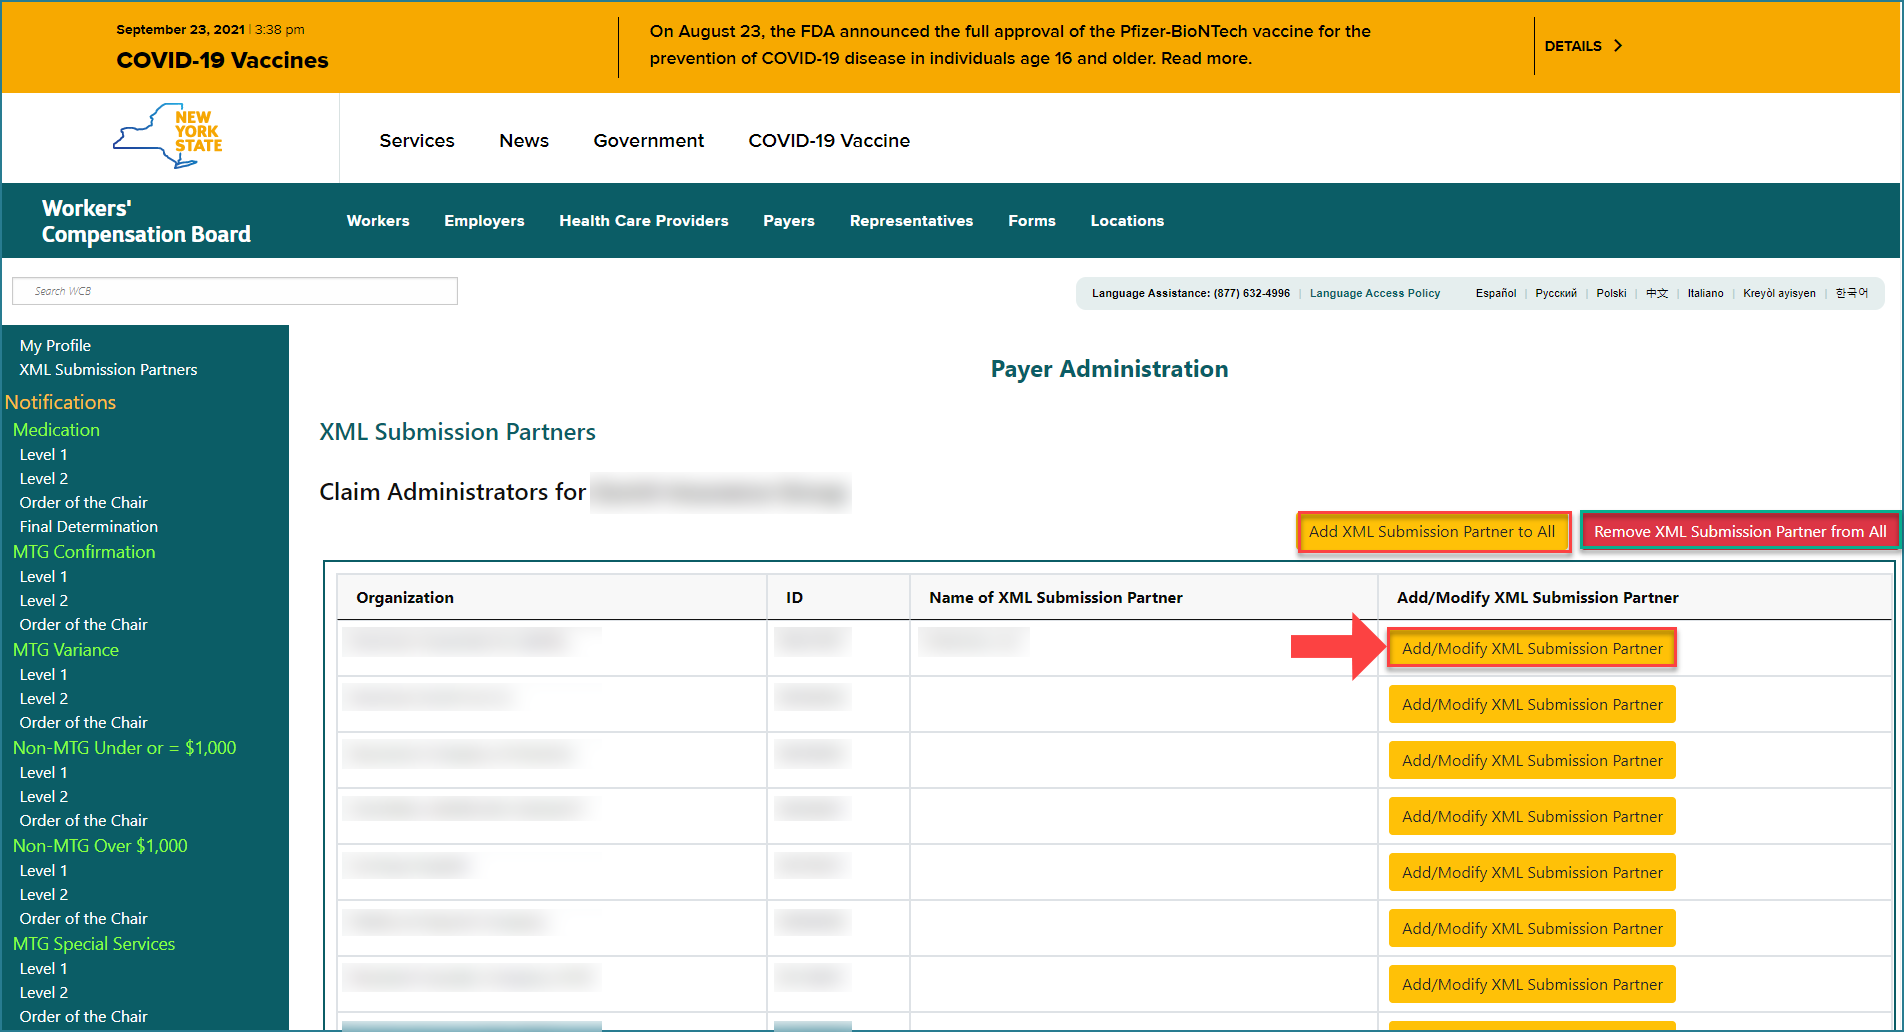 XML Submission Partners screen, Add/Modify XML Submission Partner button highlighted